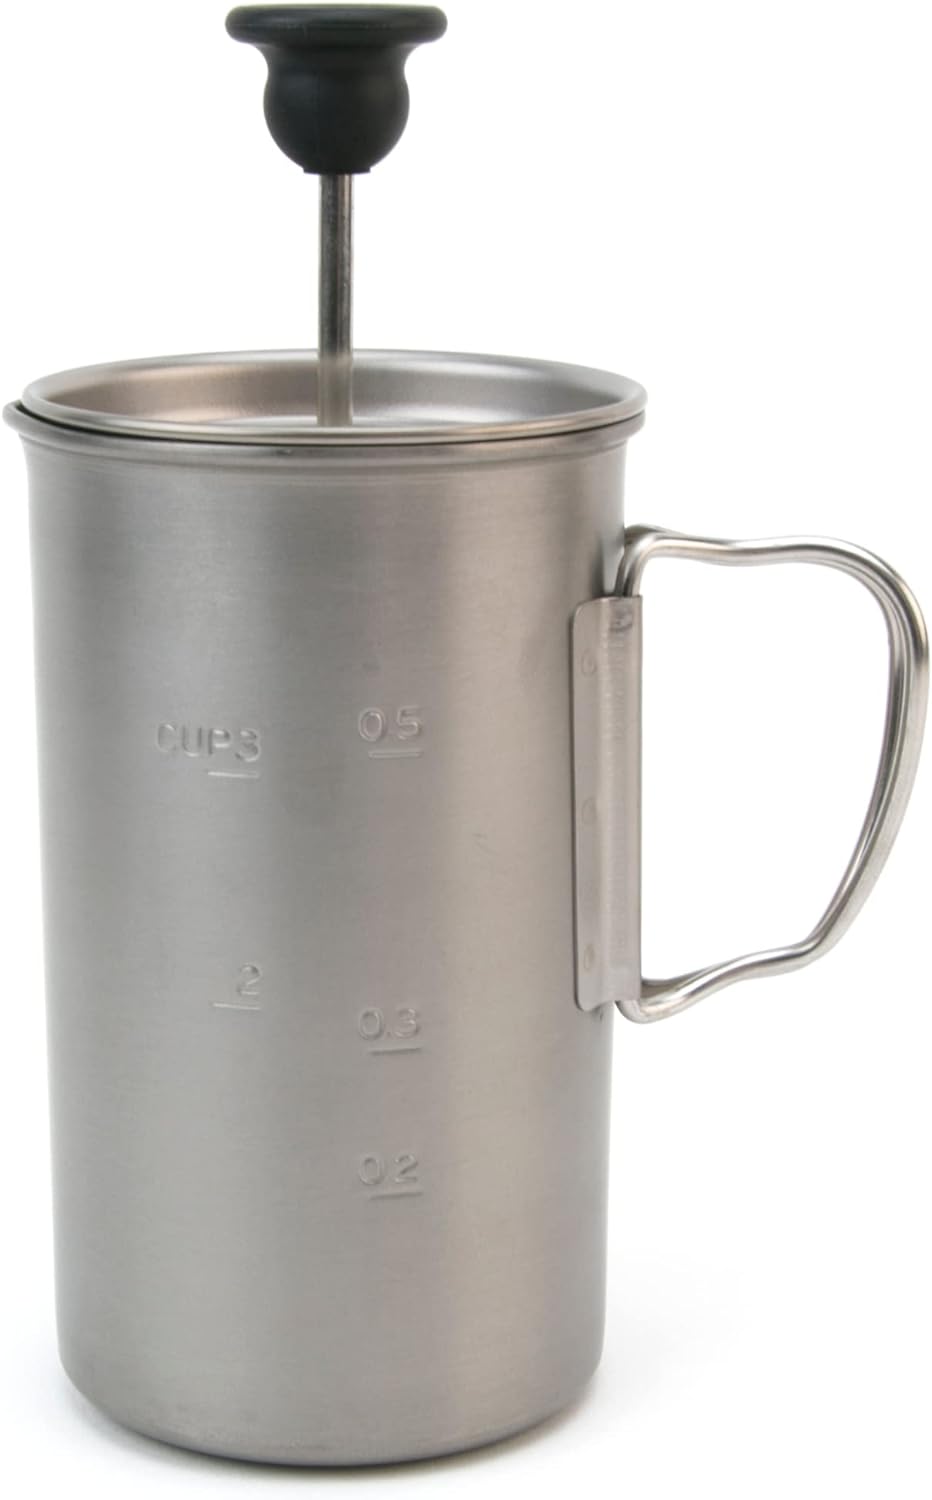 Snow Peak Titanium French Press - Ultralight Coffee Maker for Camping, Backpacking & Hiking - Camping Cookware Essential for Coffee Anywhere